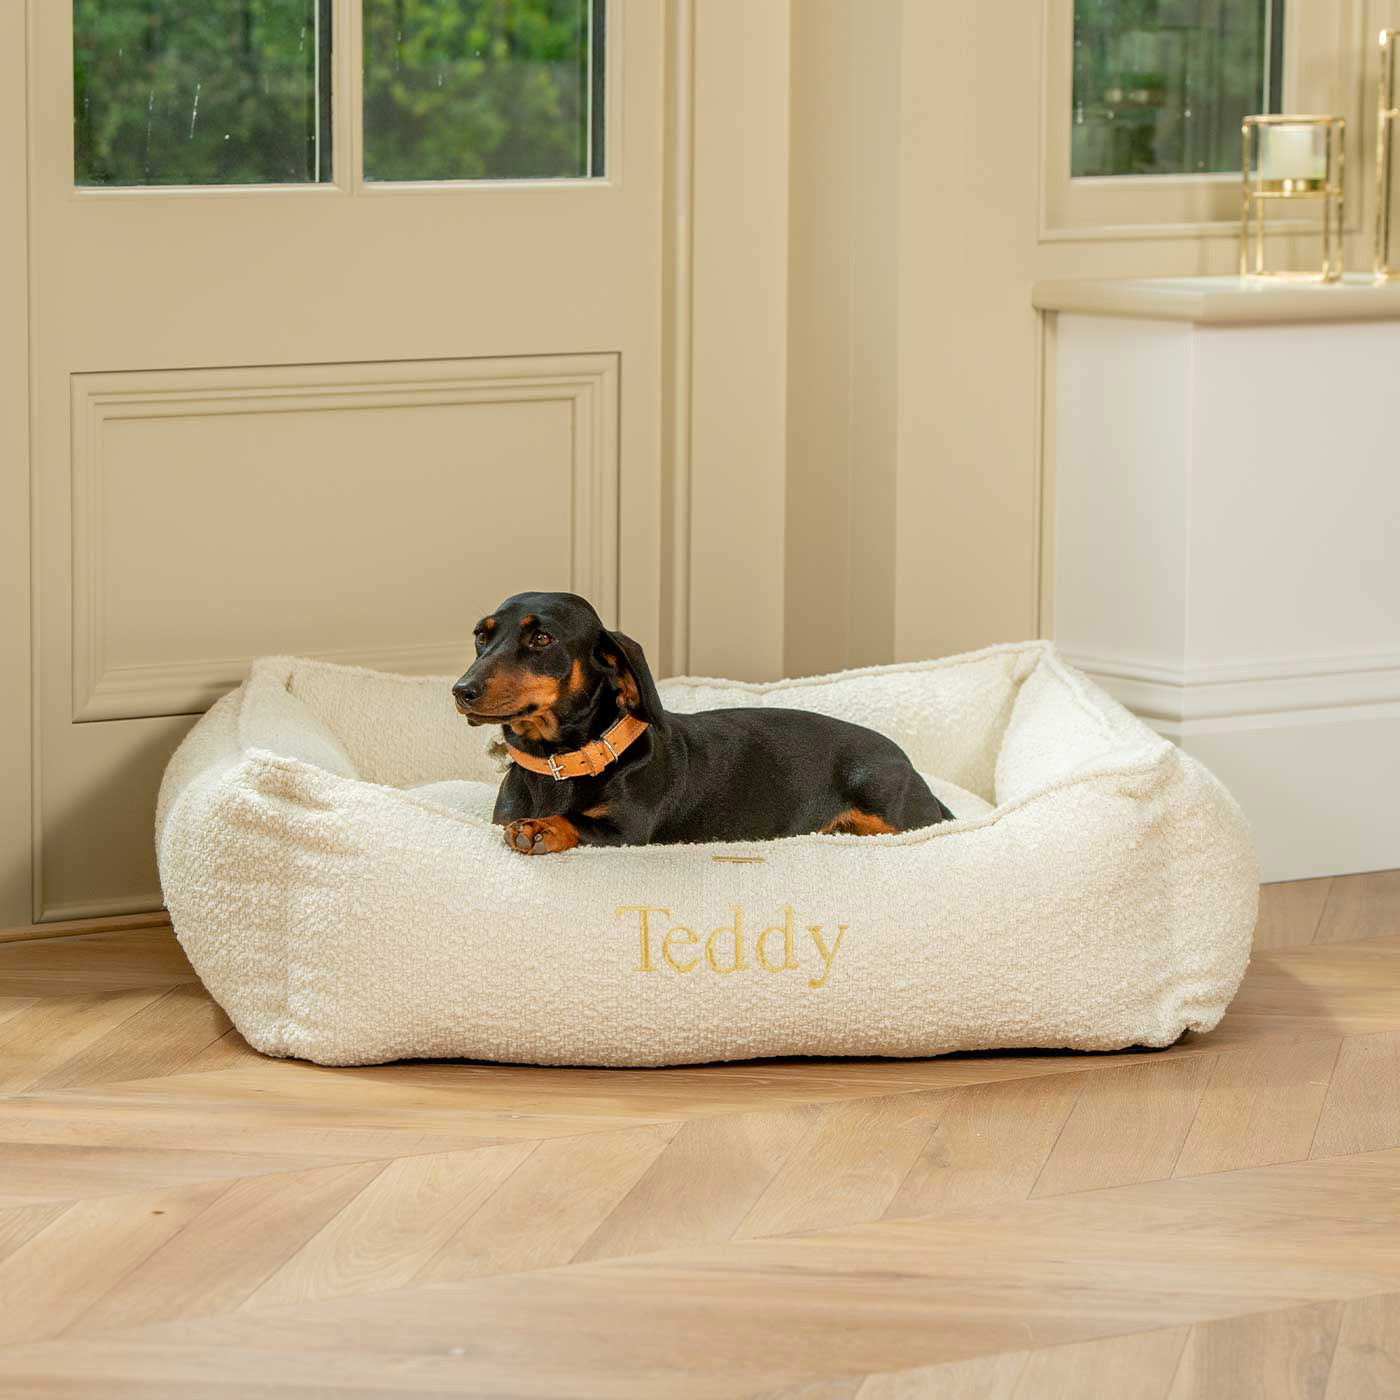 Discover Our Luxurious Handmade Box Bed For Dogs, Featuring an Inner Pillow With Sherpa Fleece On One Side To Craft The Perfect Dog Box Bed In Stunning Ivory Bouclé! Available To Personalise Now at Lords & Labradors    